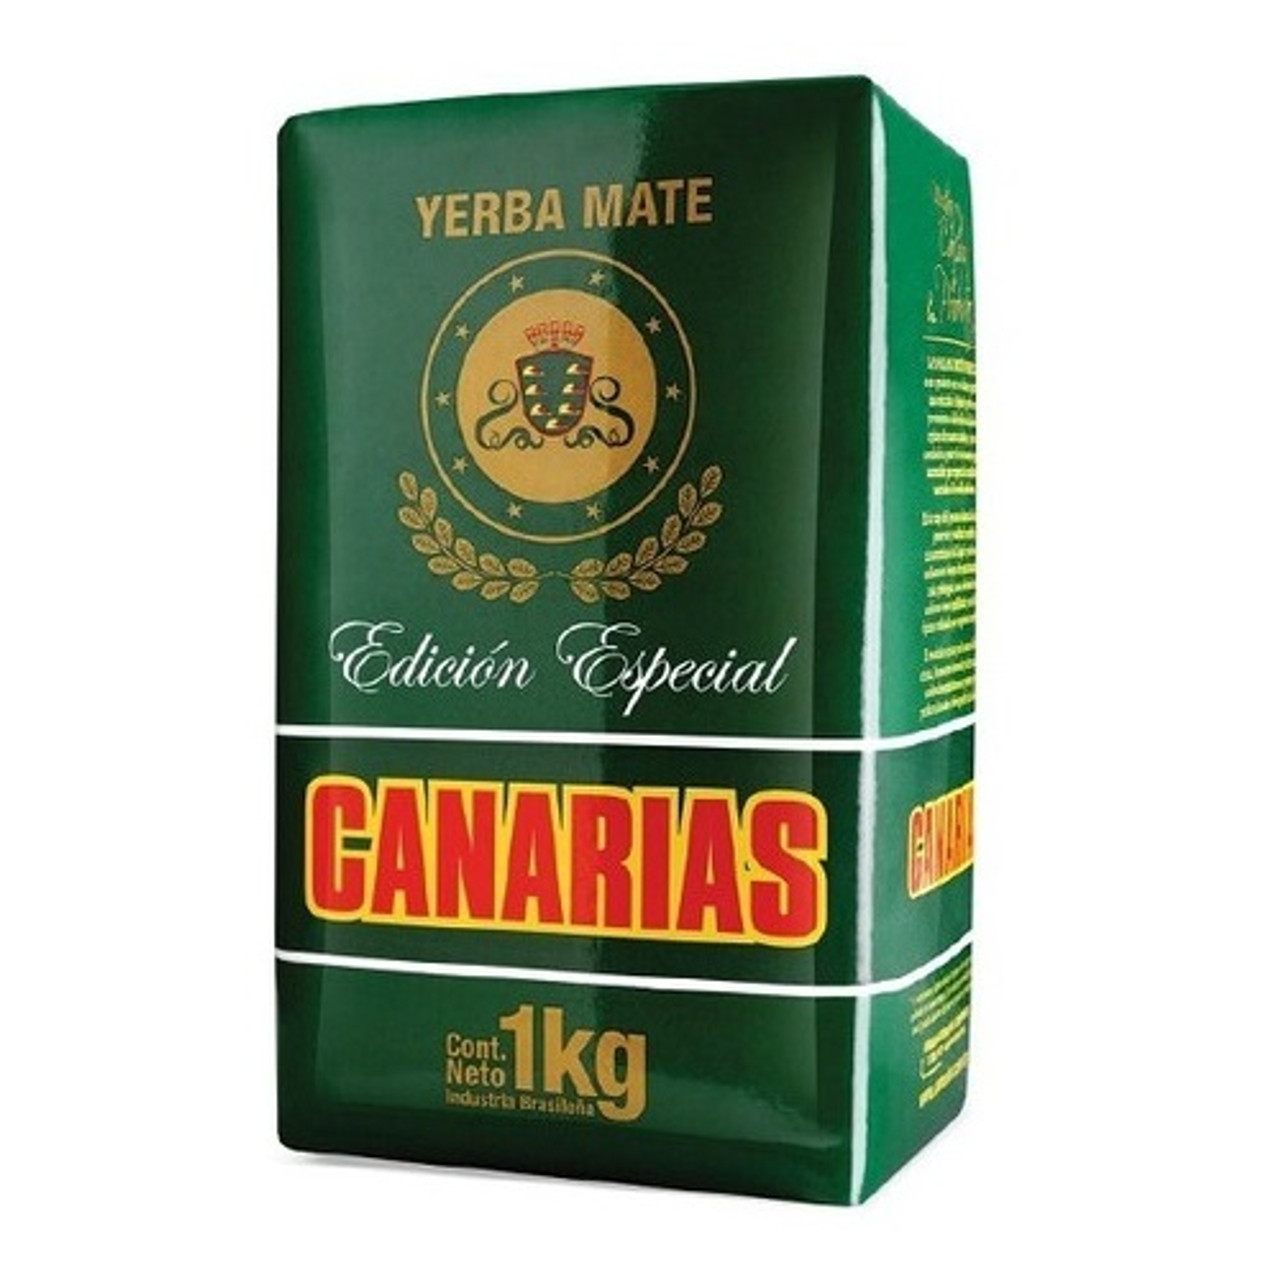 https://cdn11.bigcommerce.com/s-3stx4pub31/images/stencil/1280x1280/products/4912/13095/canarias-yerba-mate-special-1-kg__77875.1654107173.jpg?c=2?imbypass=on